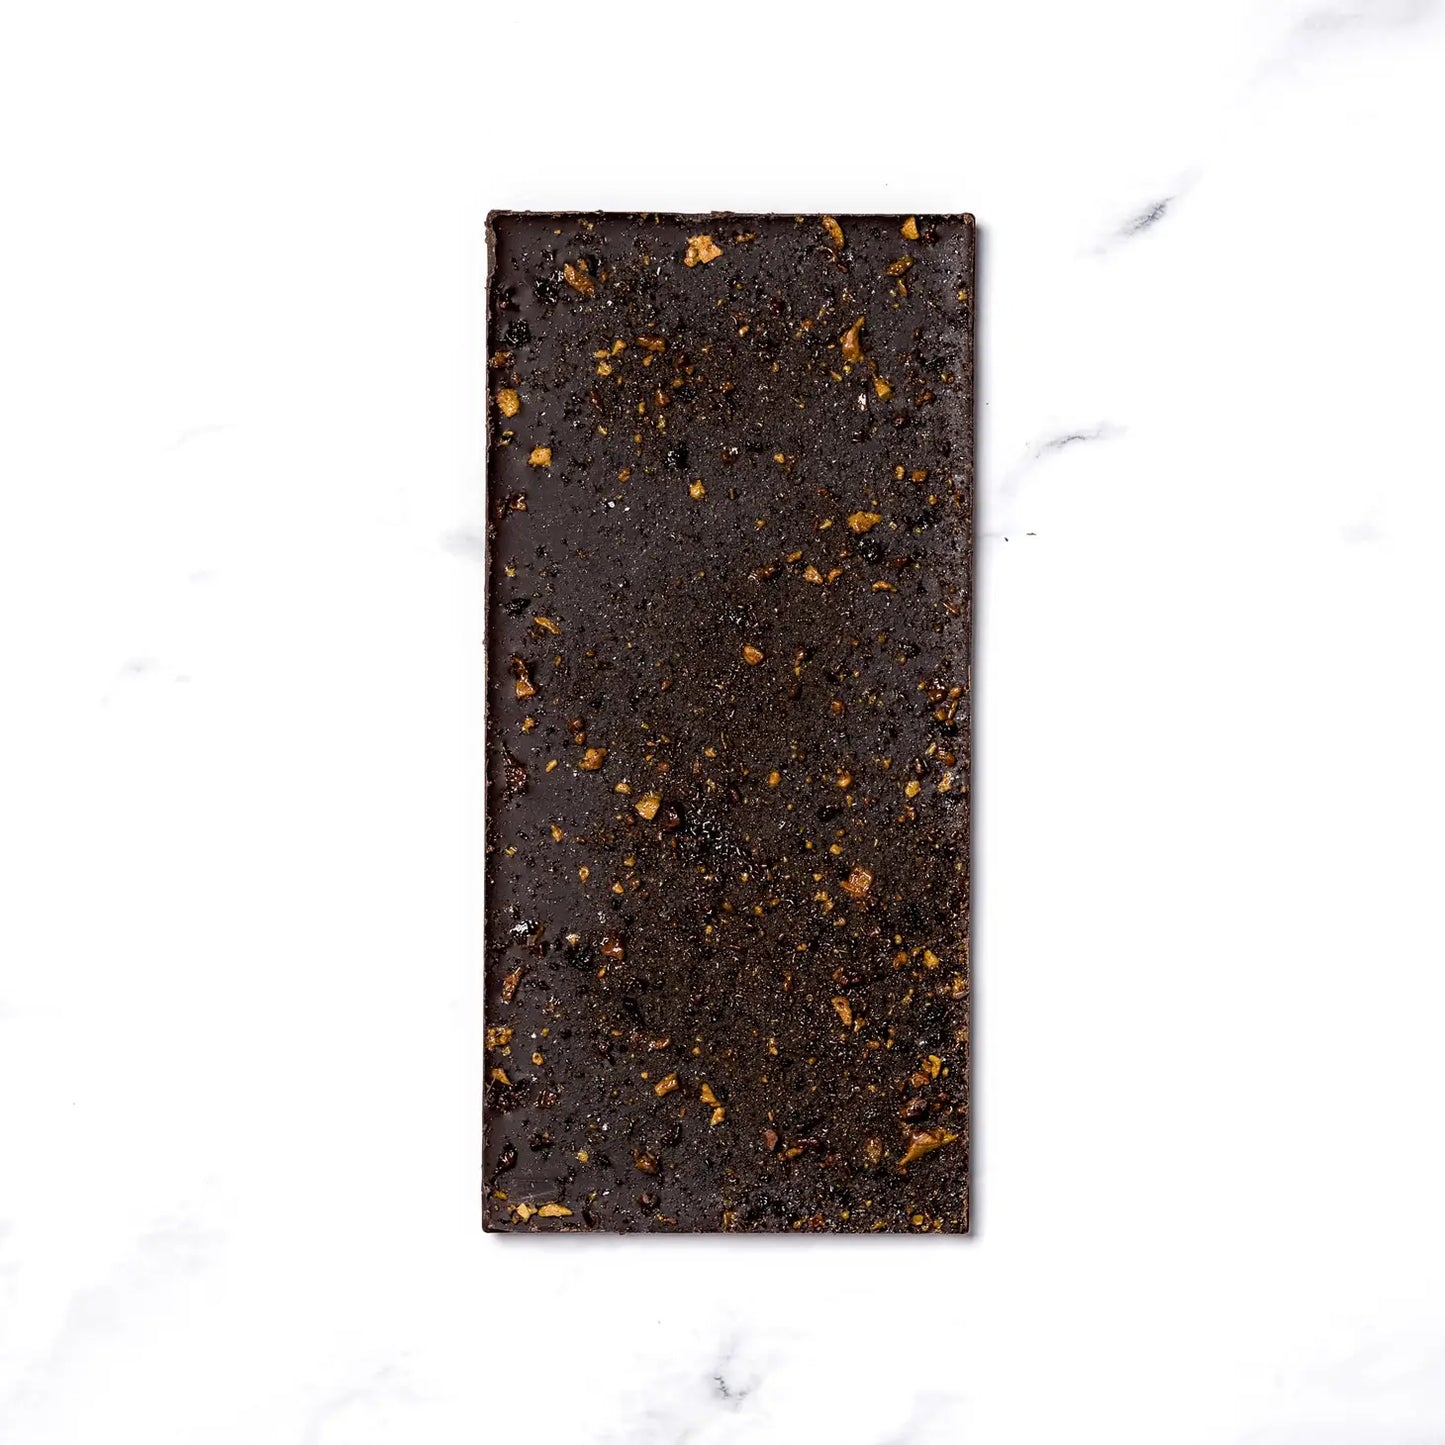 Honeycomb Toffee, 75% Cacao